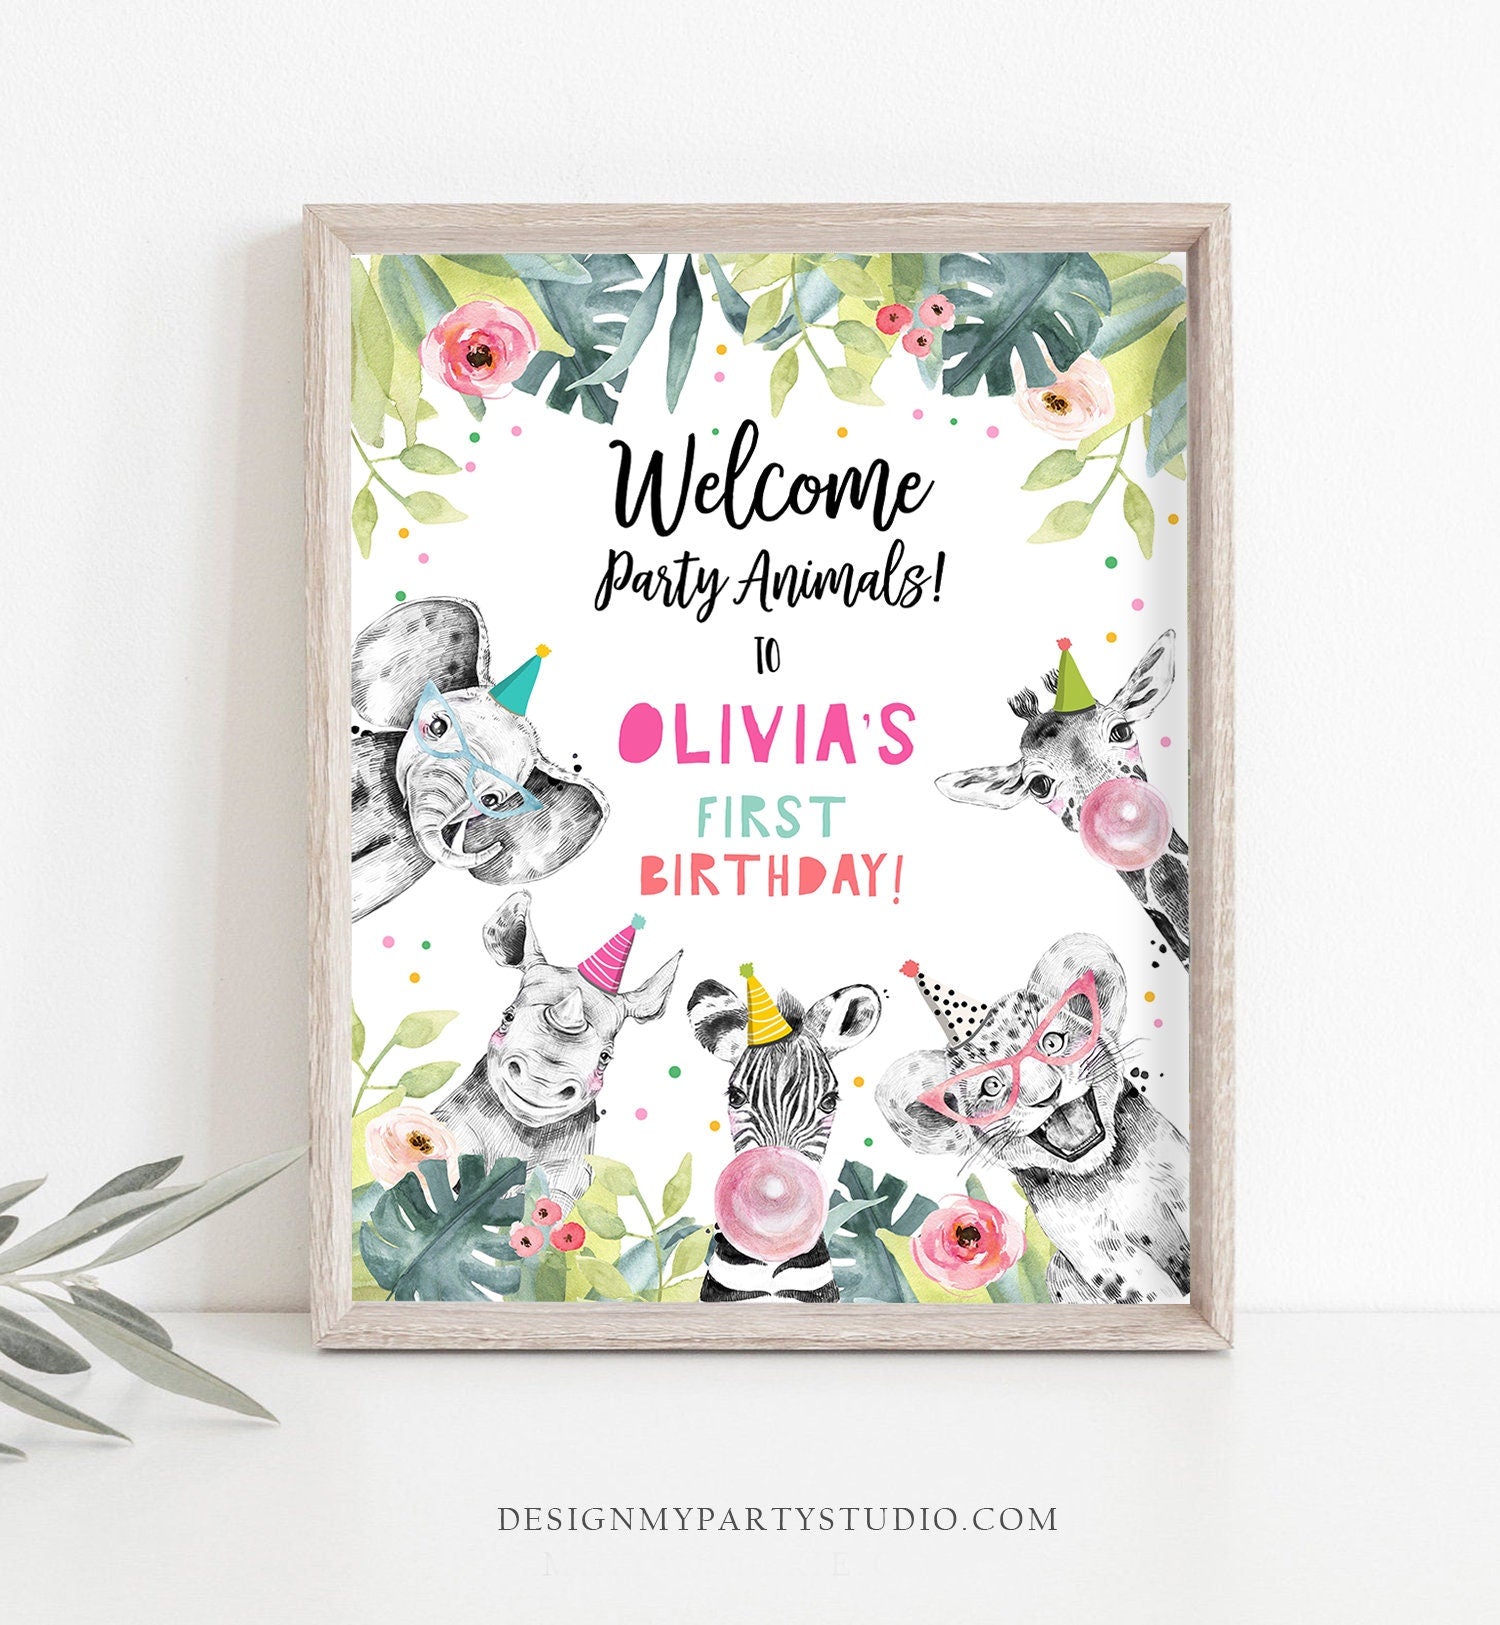 Editable Party Animals Welcome Sign Party Animal Sign Zoo Safari Welcome Jungle Sign Birthday Animals Girl Template PRINTABLE Corjl 0322